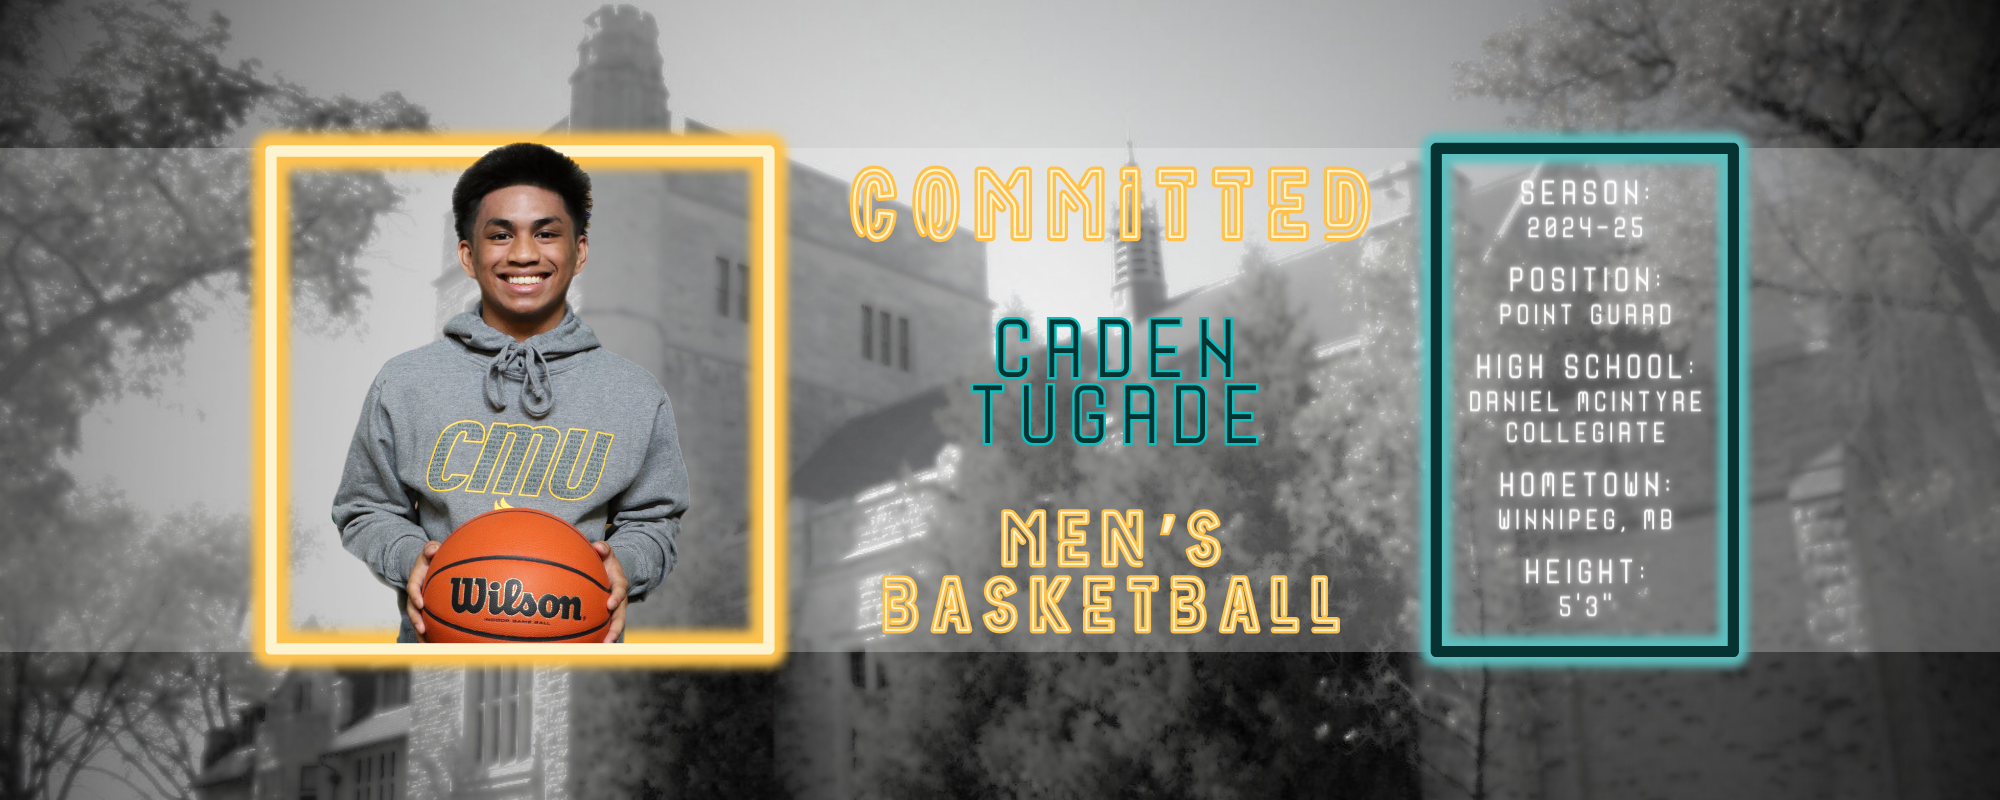 Blazers MBB Make their First Offseason Move Signing Point Guard Tugade